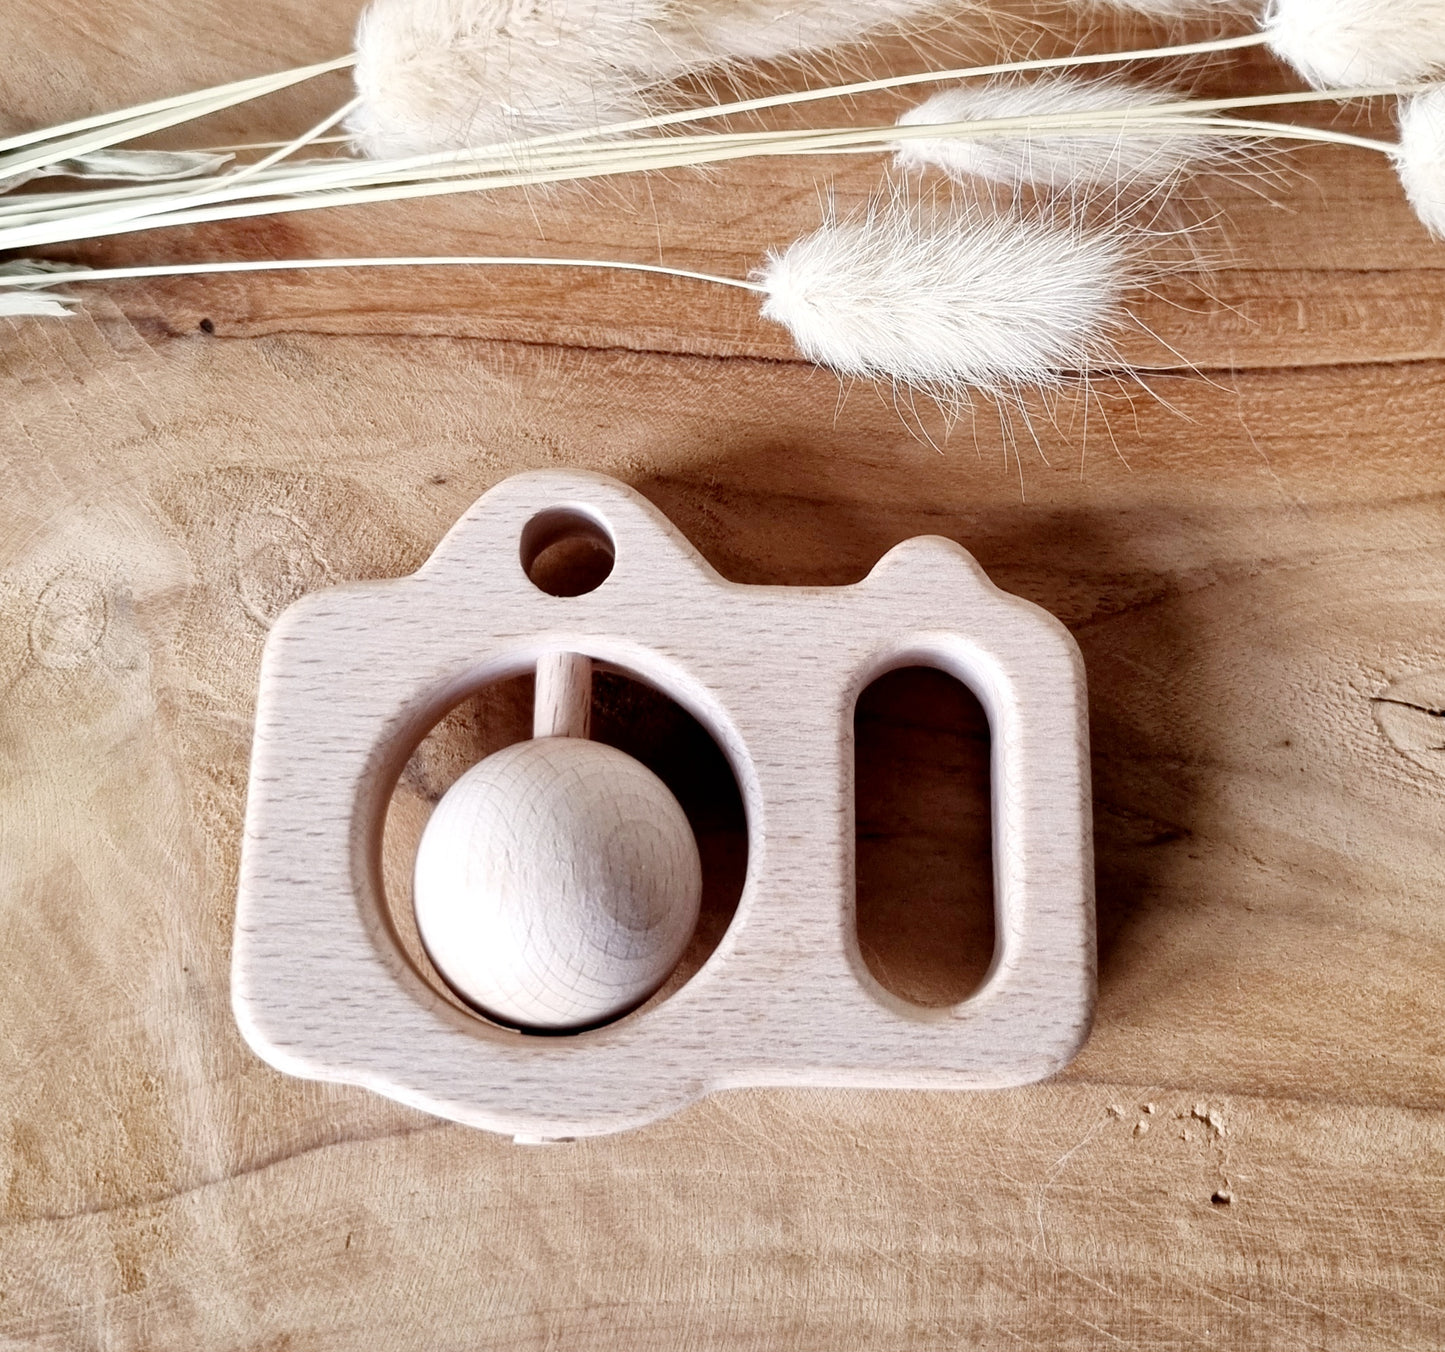 Wooden Rattle - Camera